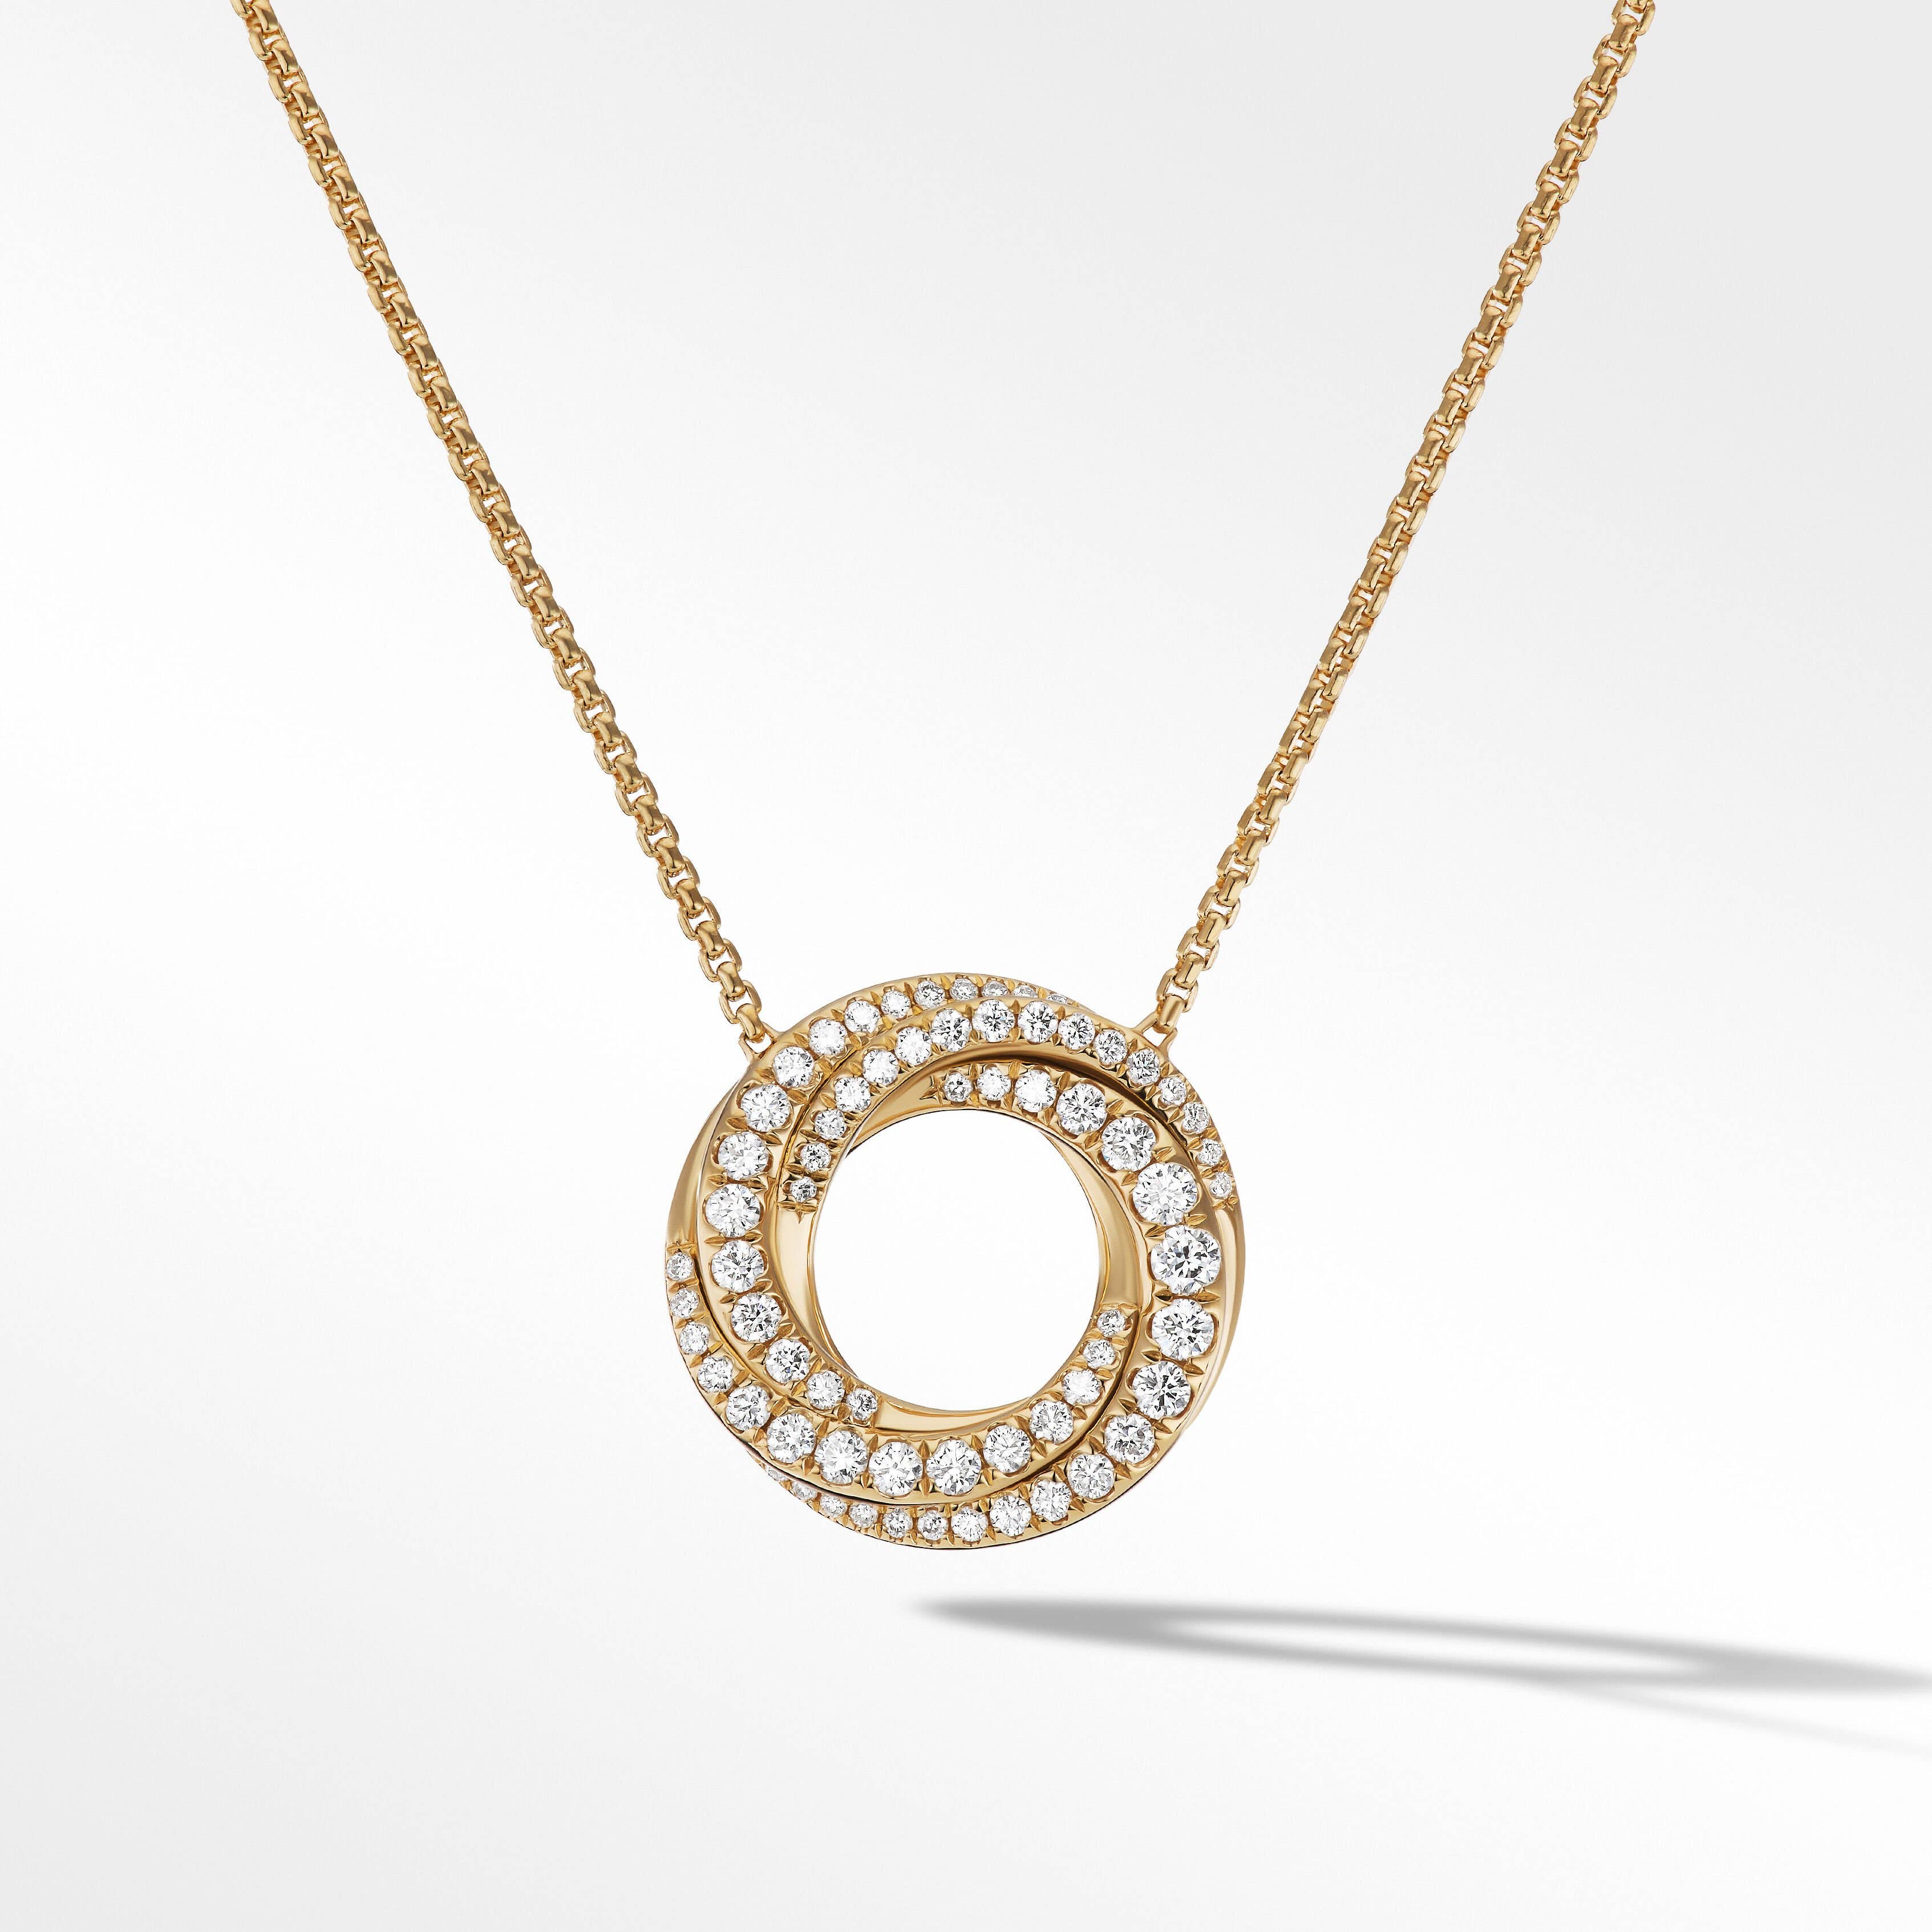 Petite Pavé Crossover Pendant Necklace in 18K Yellow Gold with Diamonds